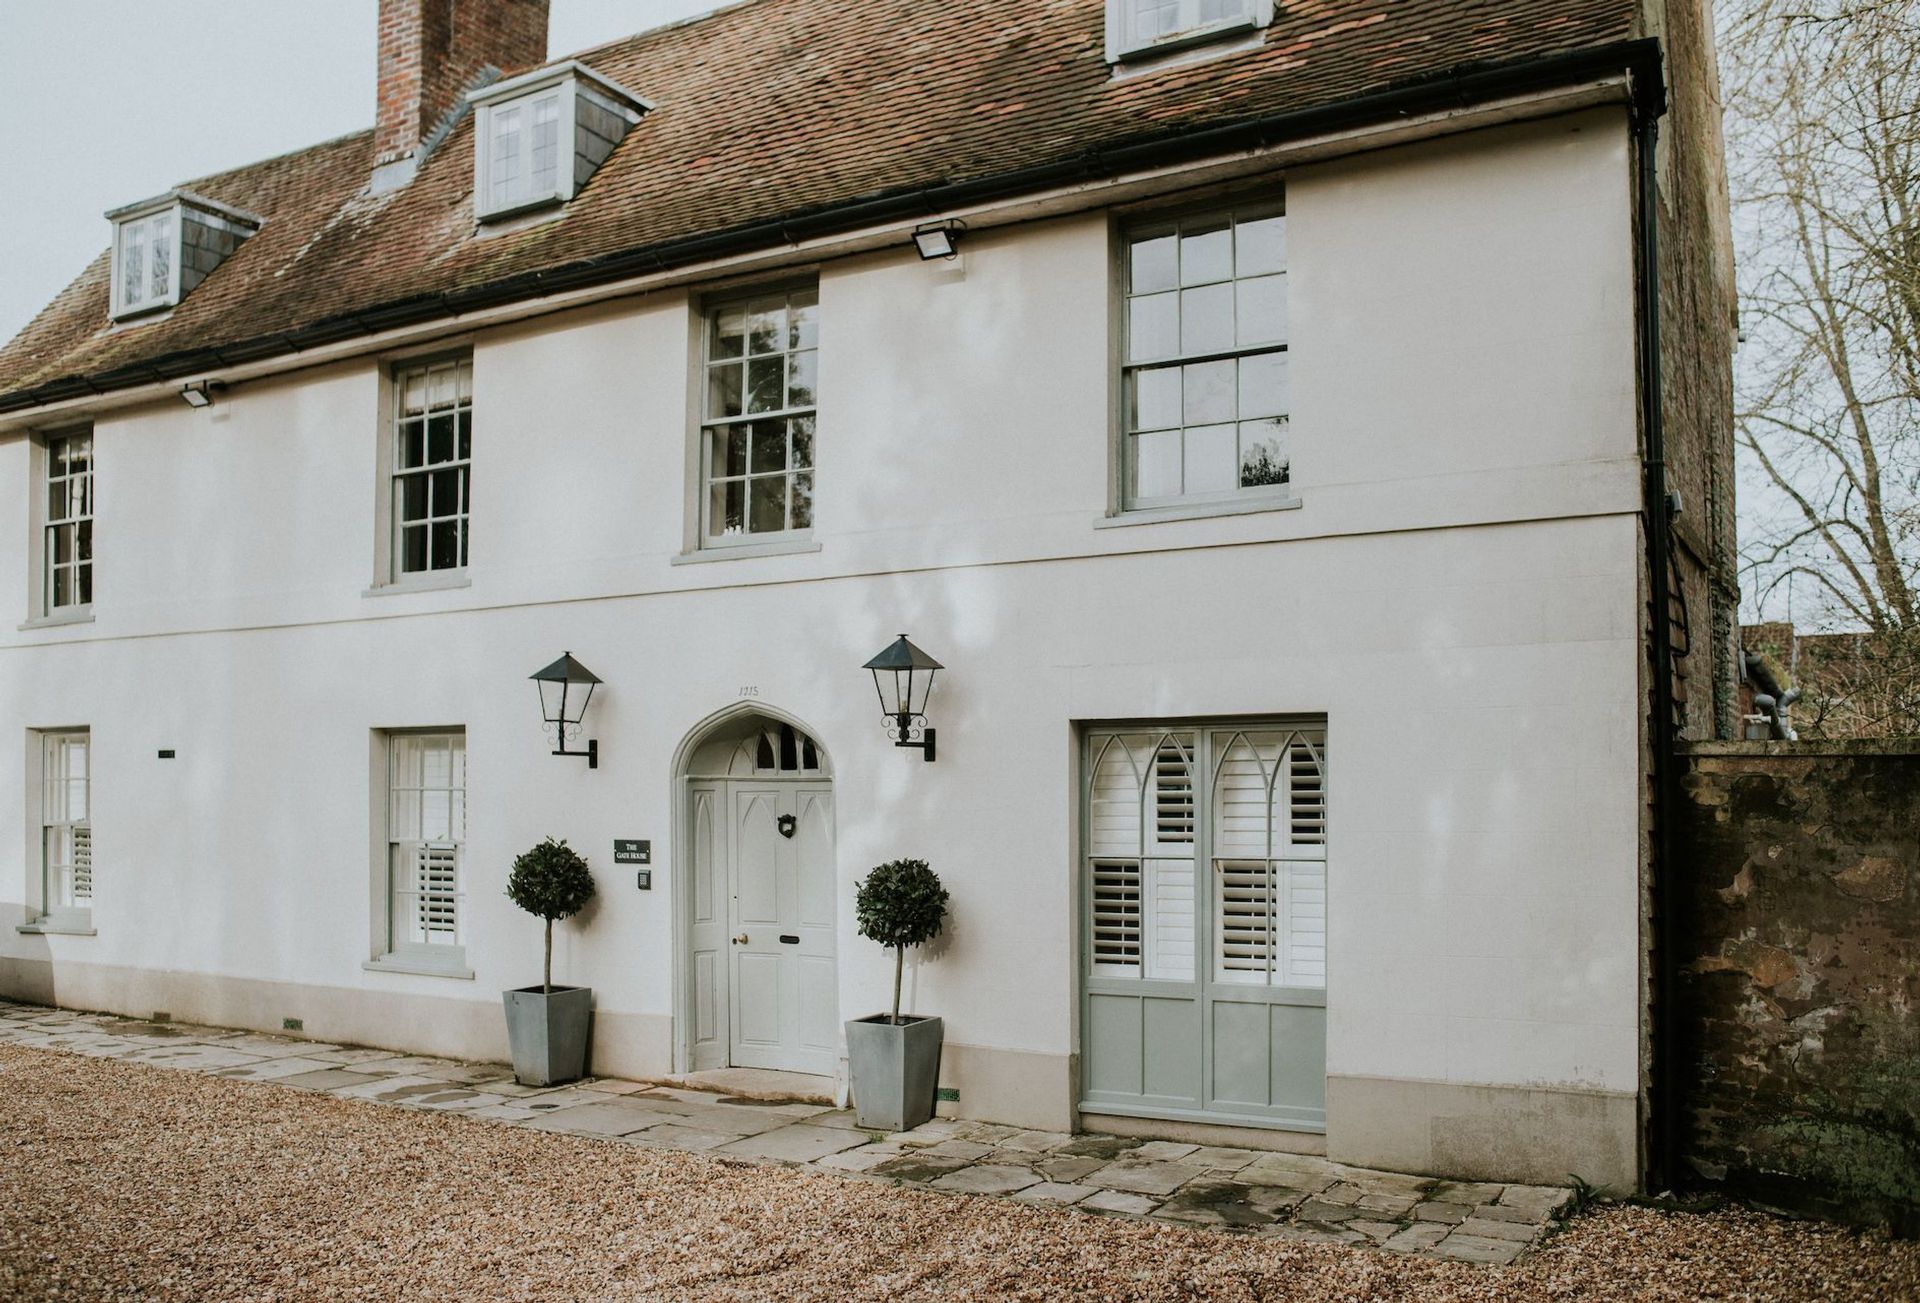 The Gate House is located in Wimborne and surrounding villages